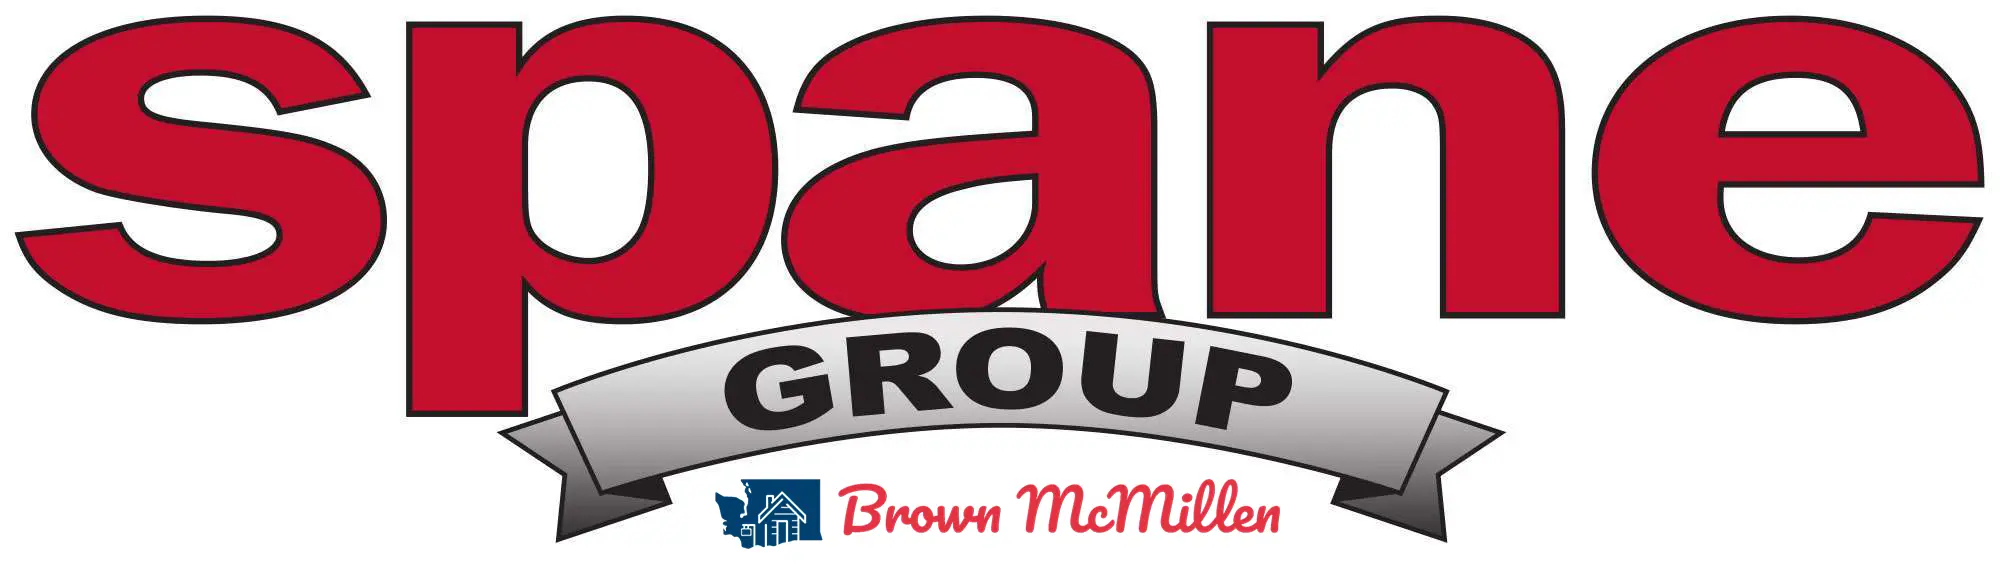 Spane Group with Brown McMillan